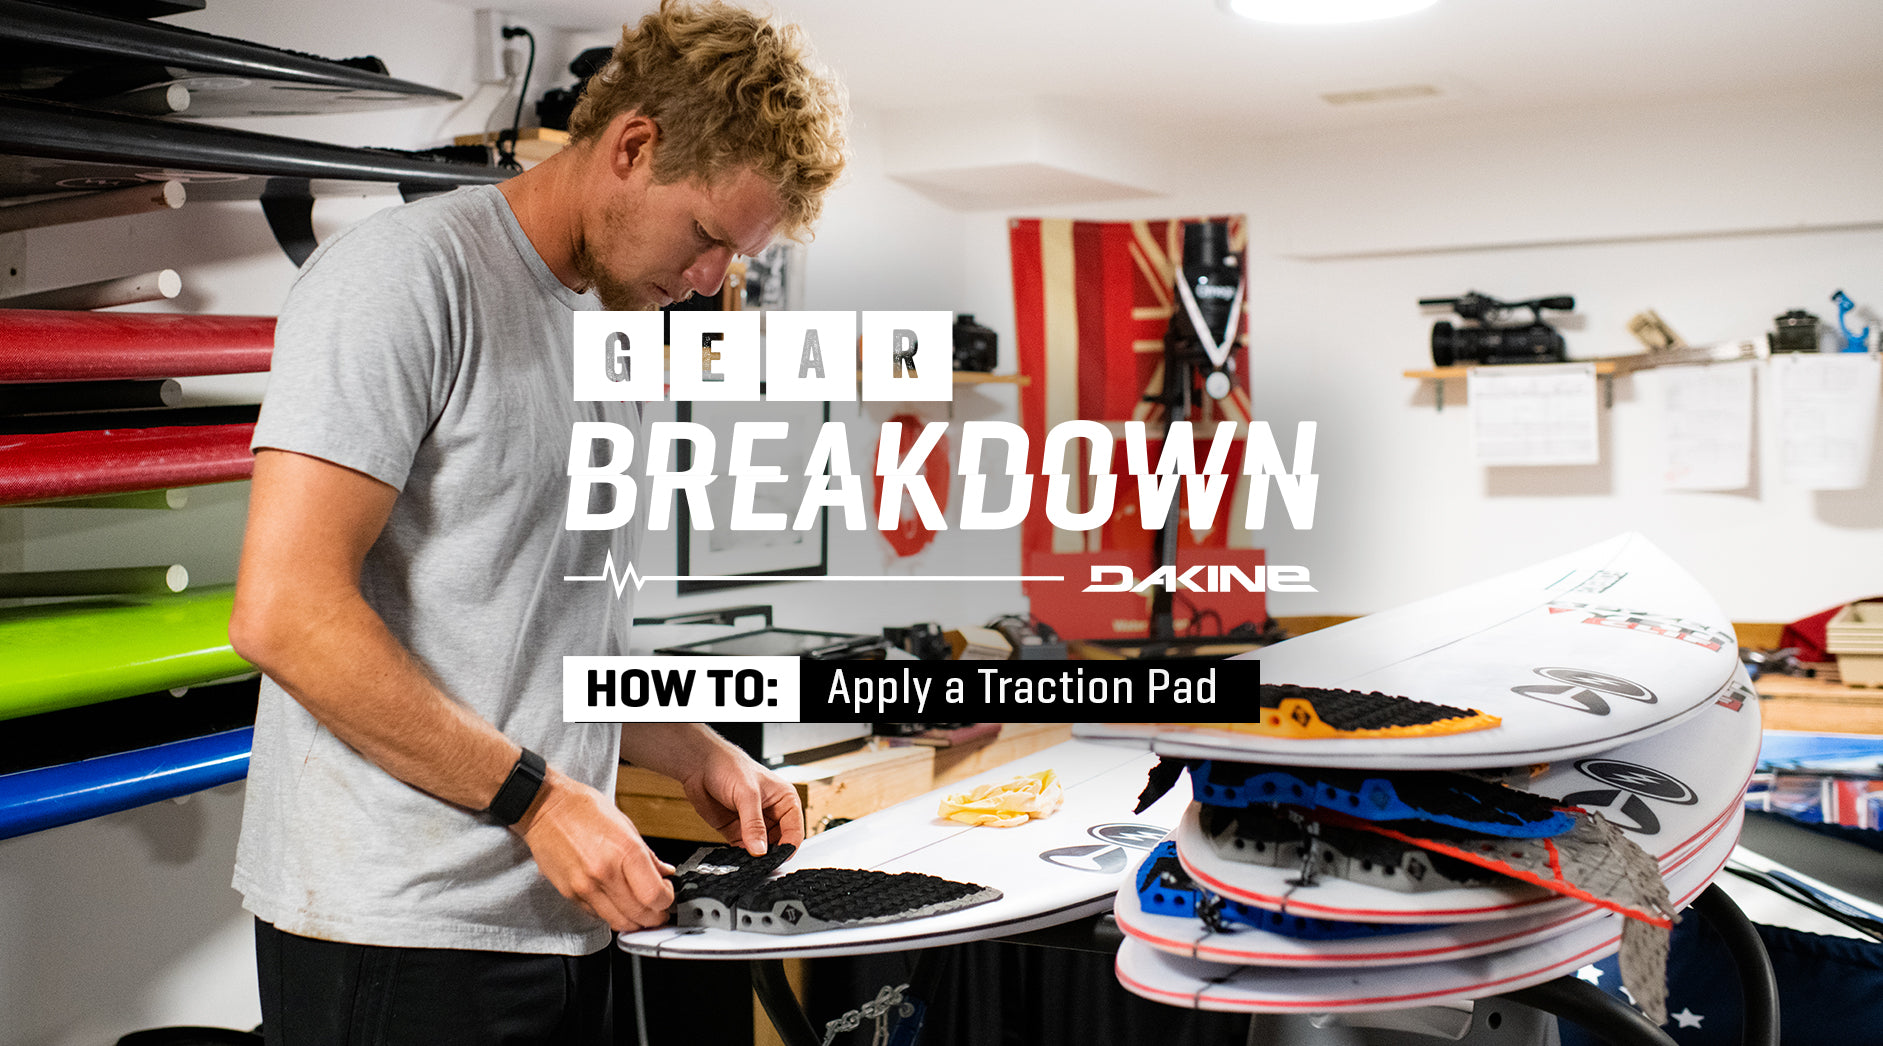 Snowboard Stomp Pad: Who Needs It And How To Mount It - 360Guide